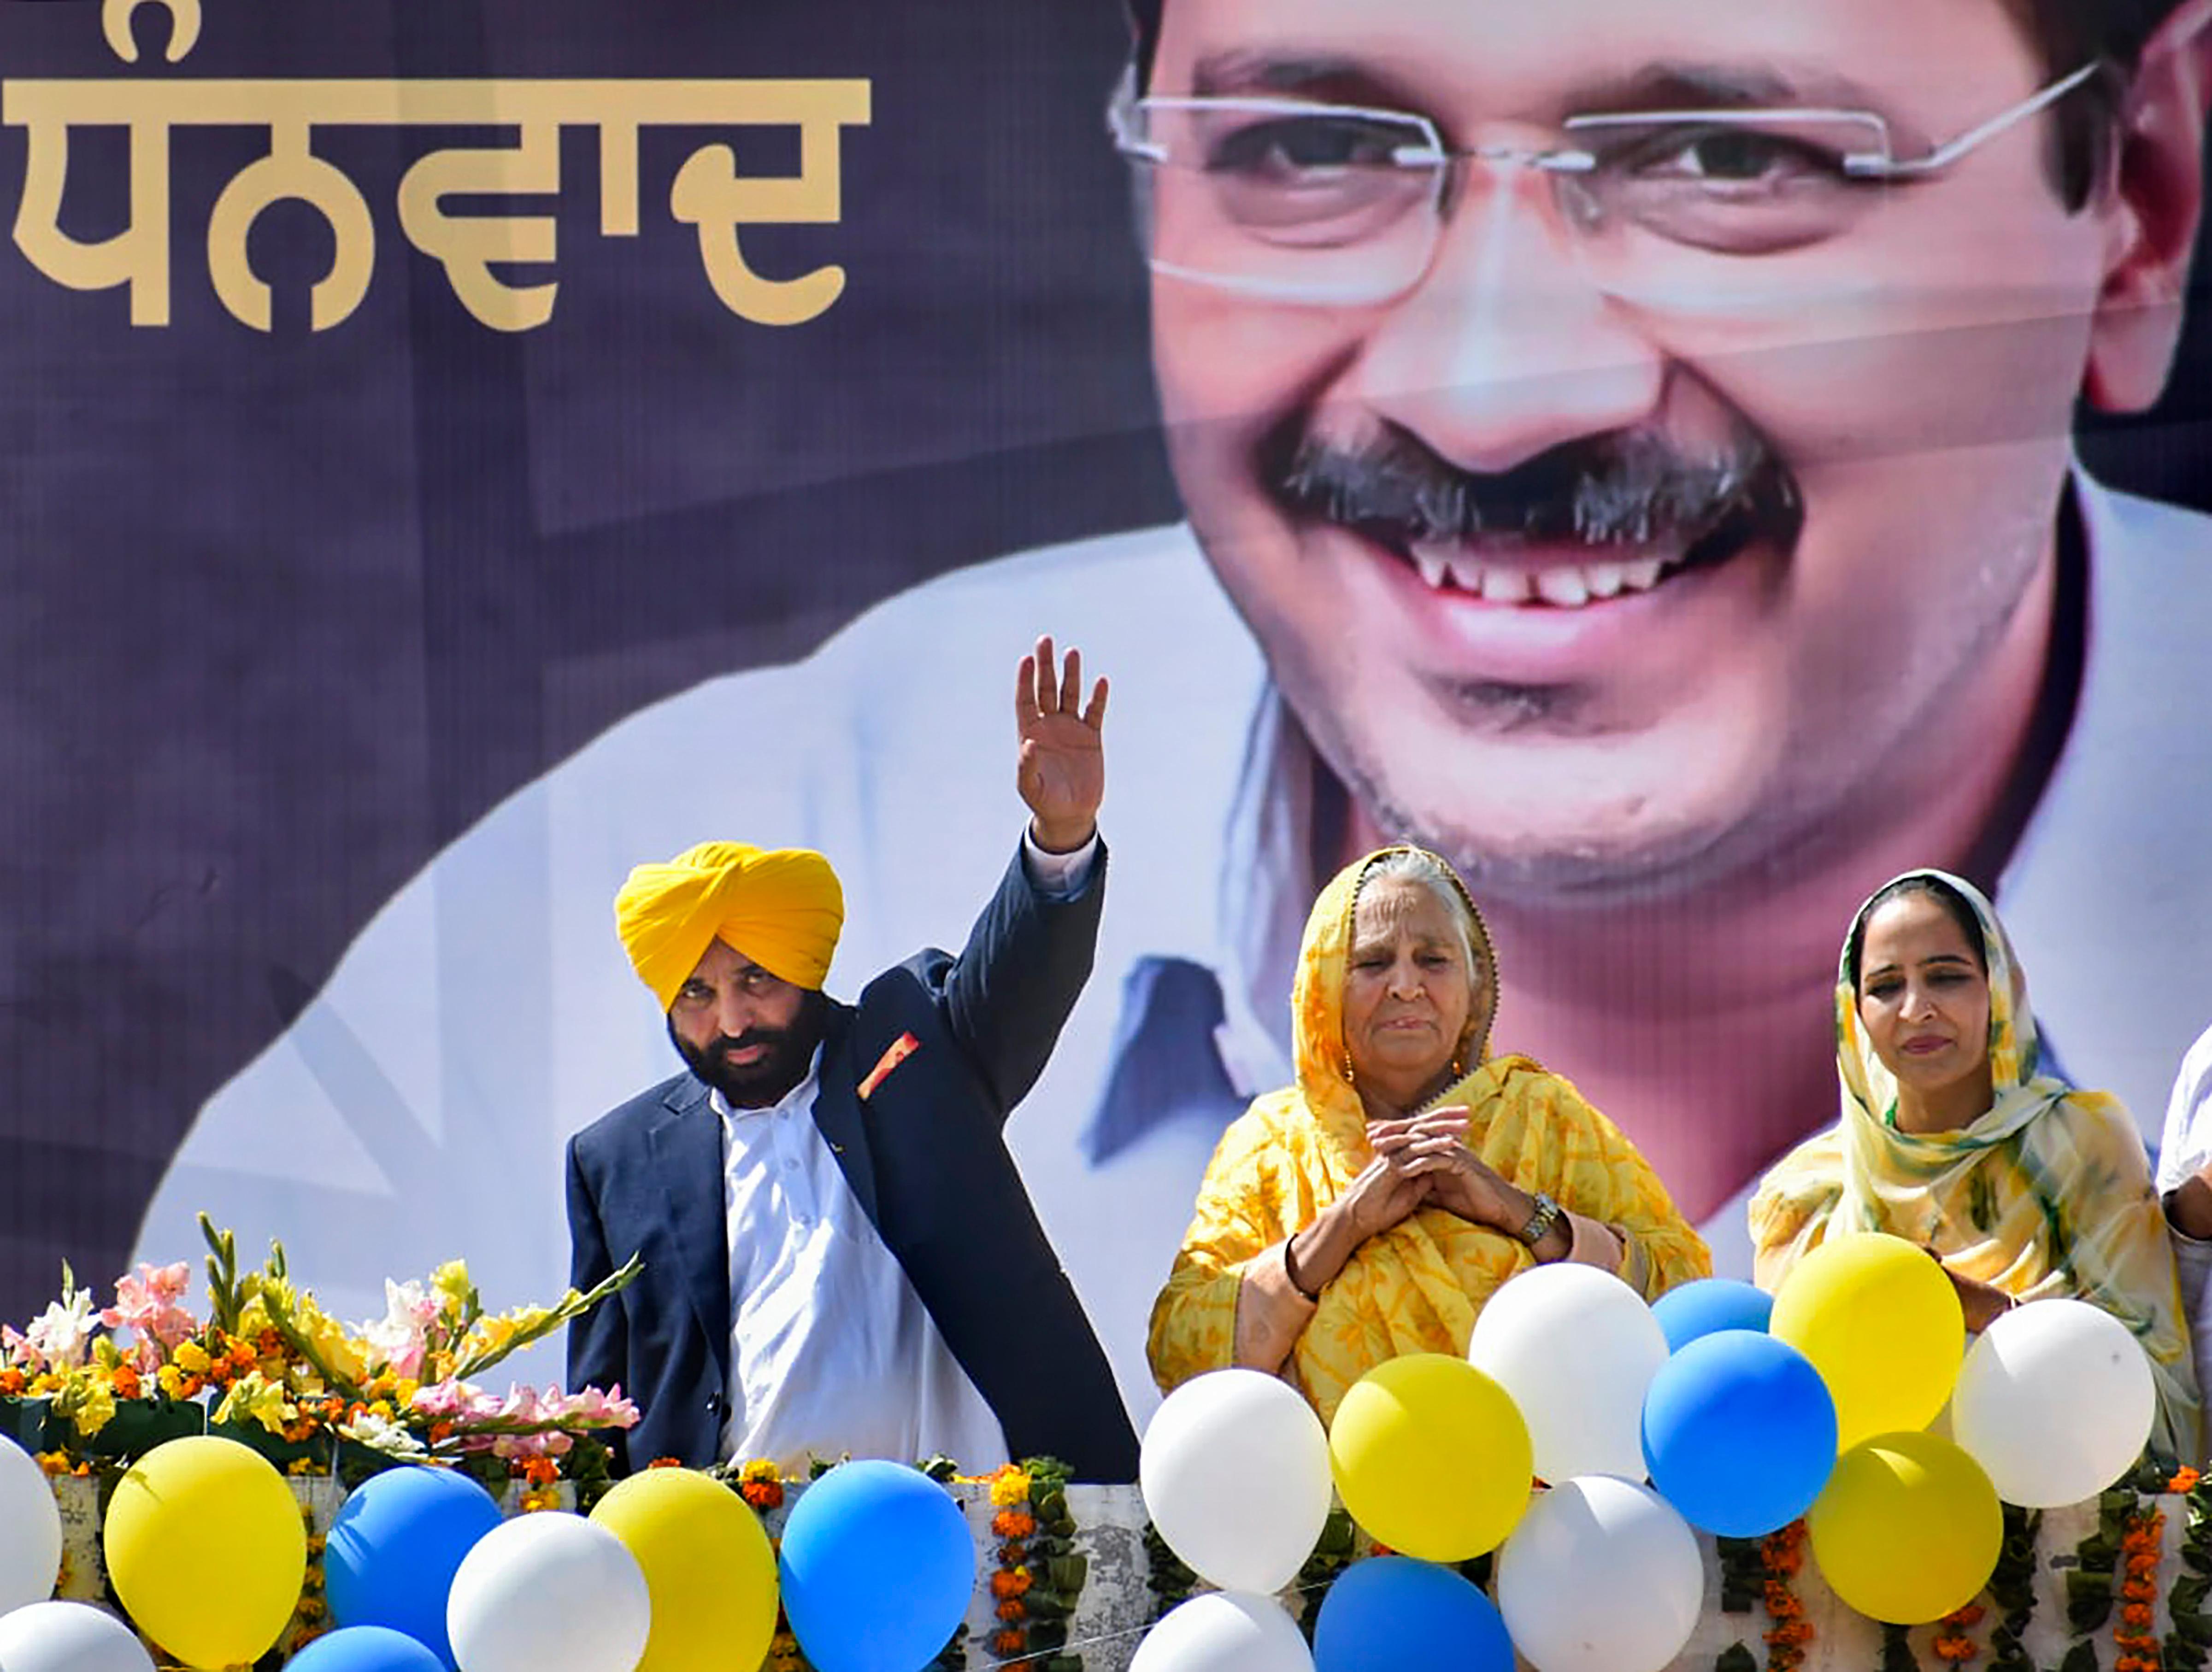 It was not just a simple victory. In fact, the AAP trounced the 2022 Assembly polls this time by winning over 90 seats in the 117-seat Punjab Assembly. It is the first time that the party has expanded its political footprint beyond Delhi.